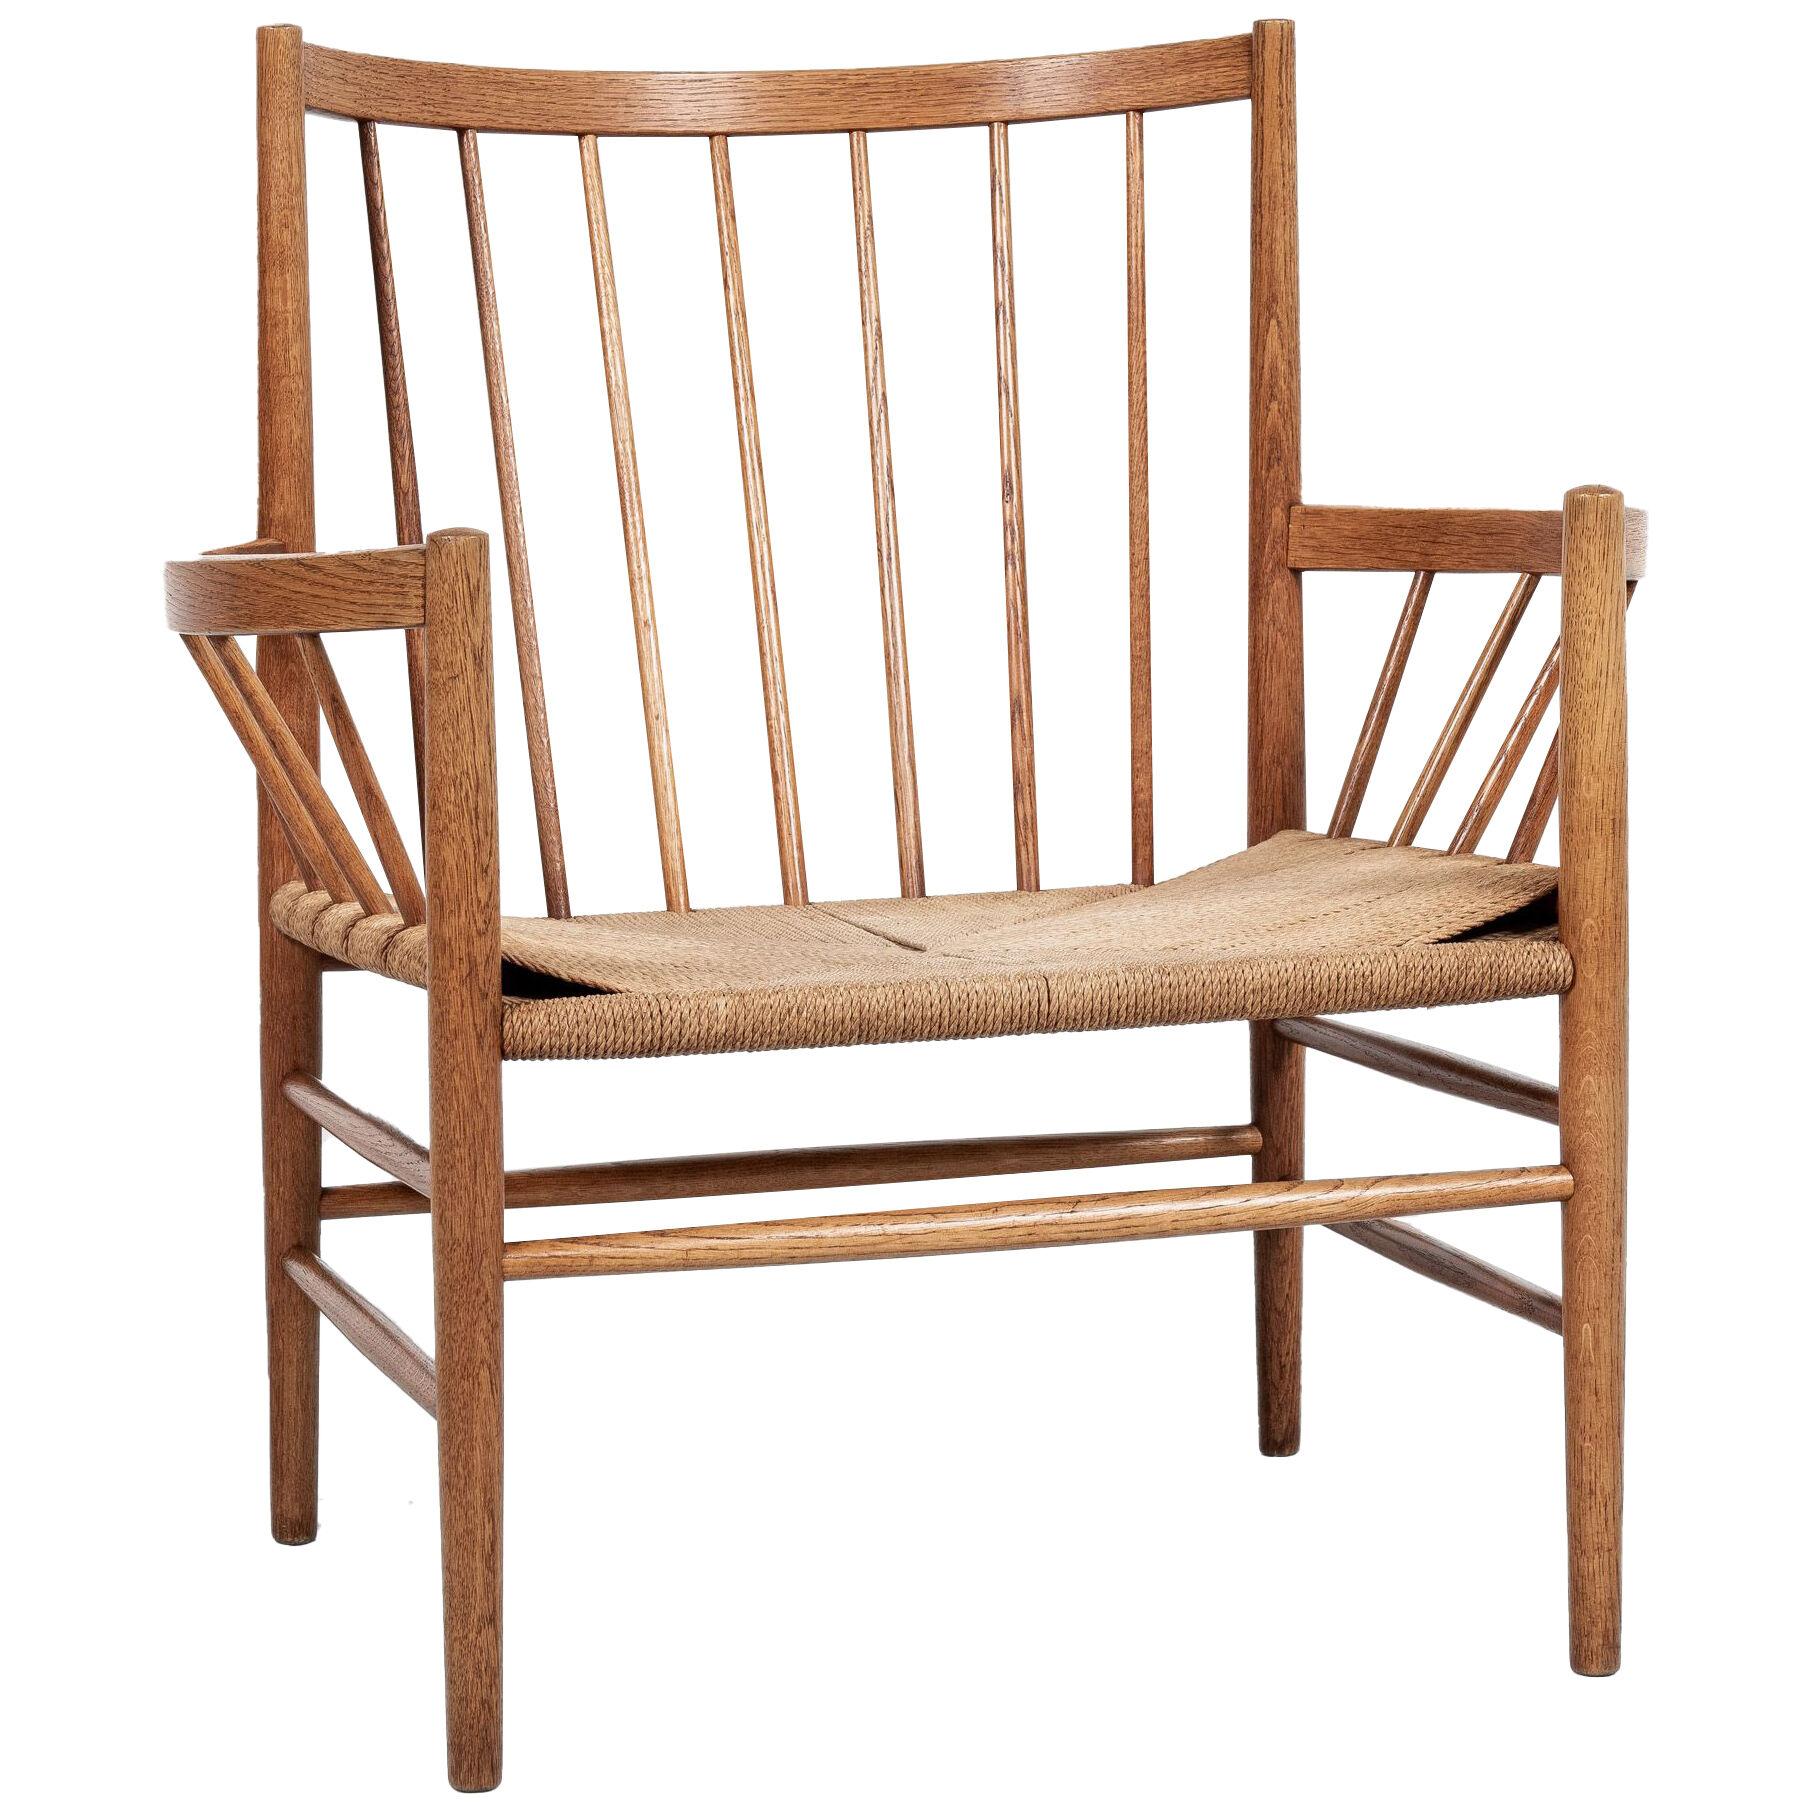 Midcentury Danish easy chair in oak and paper cord by Jørgen Baekmark for FDB